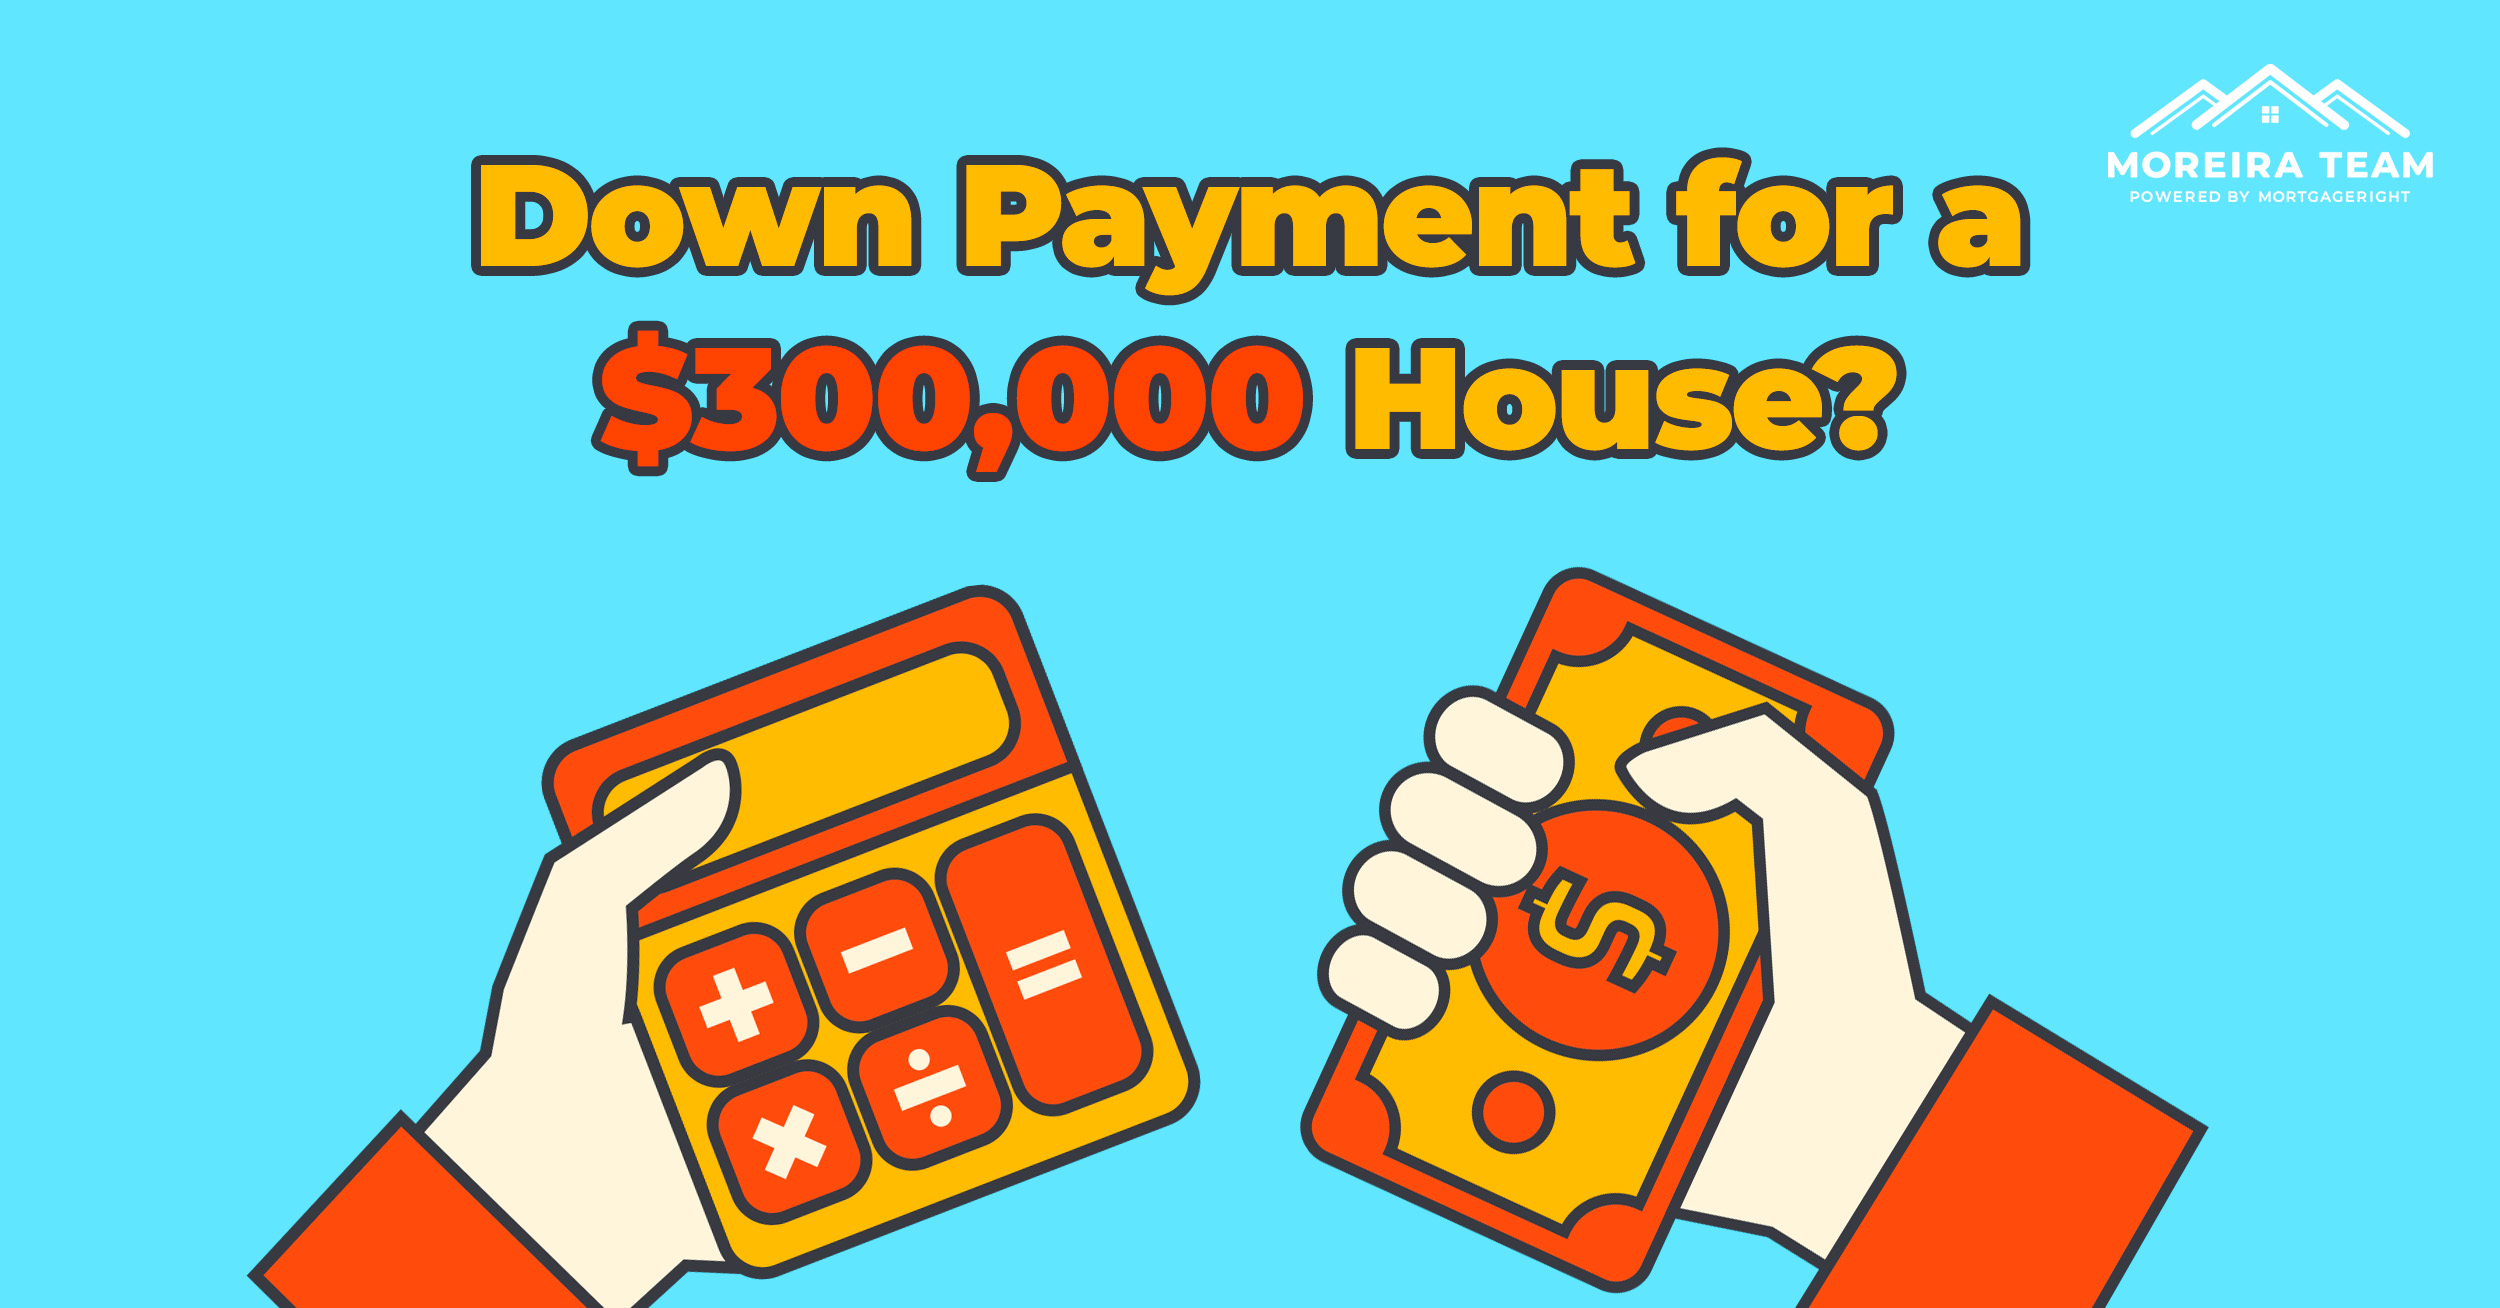 How Much is the Down Payment for a $300,000 House?